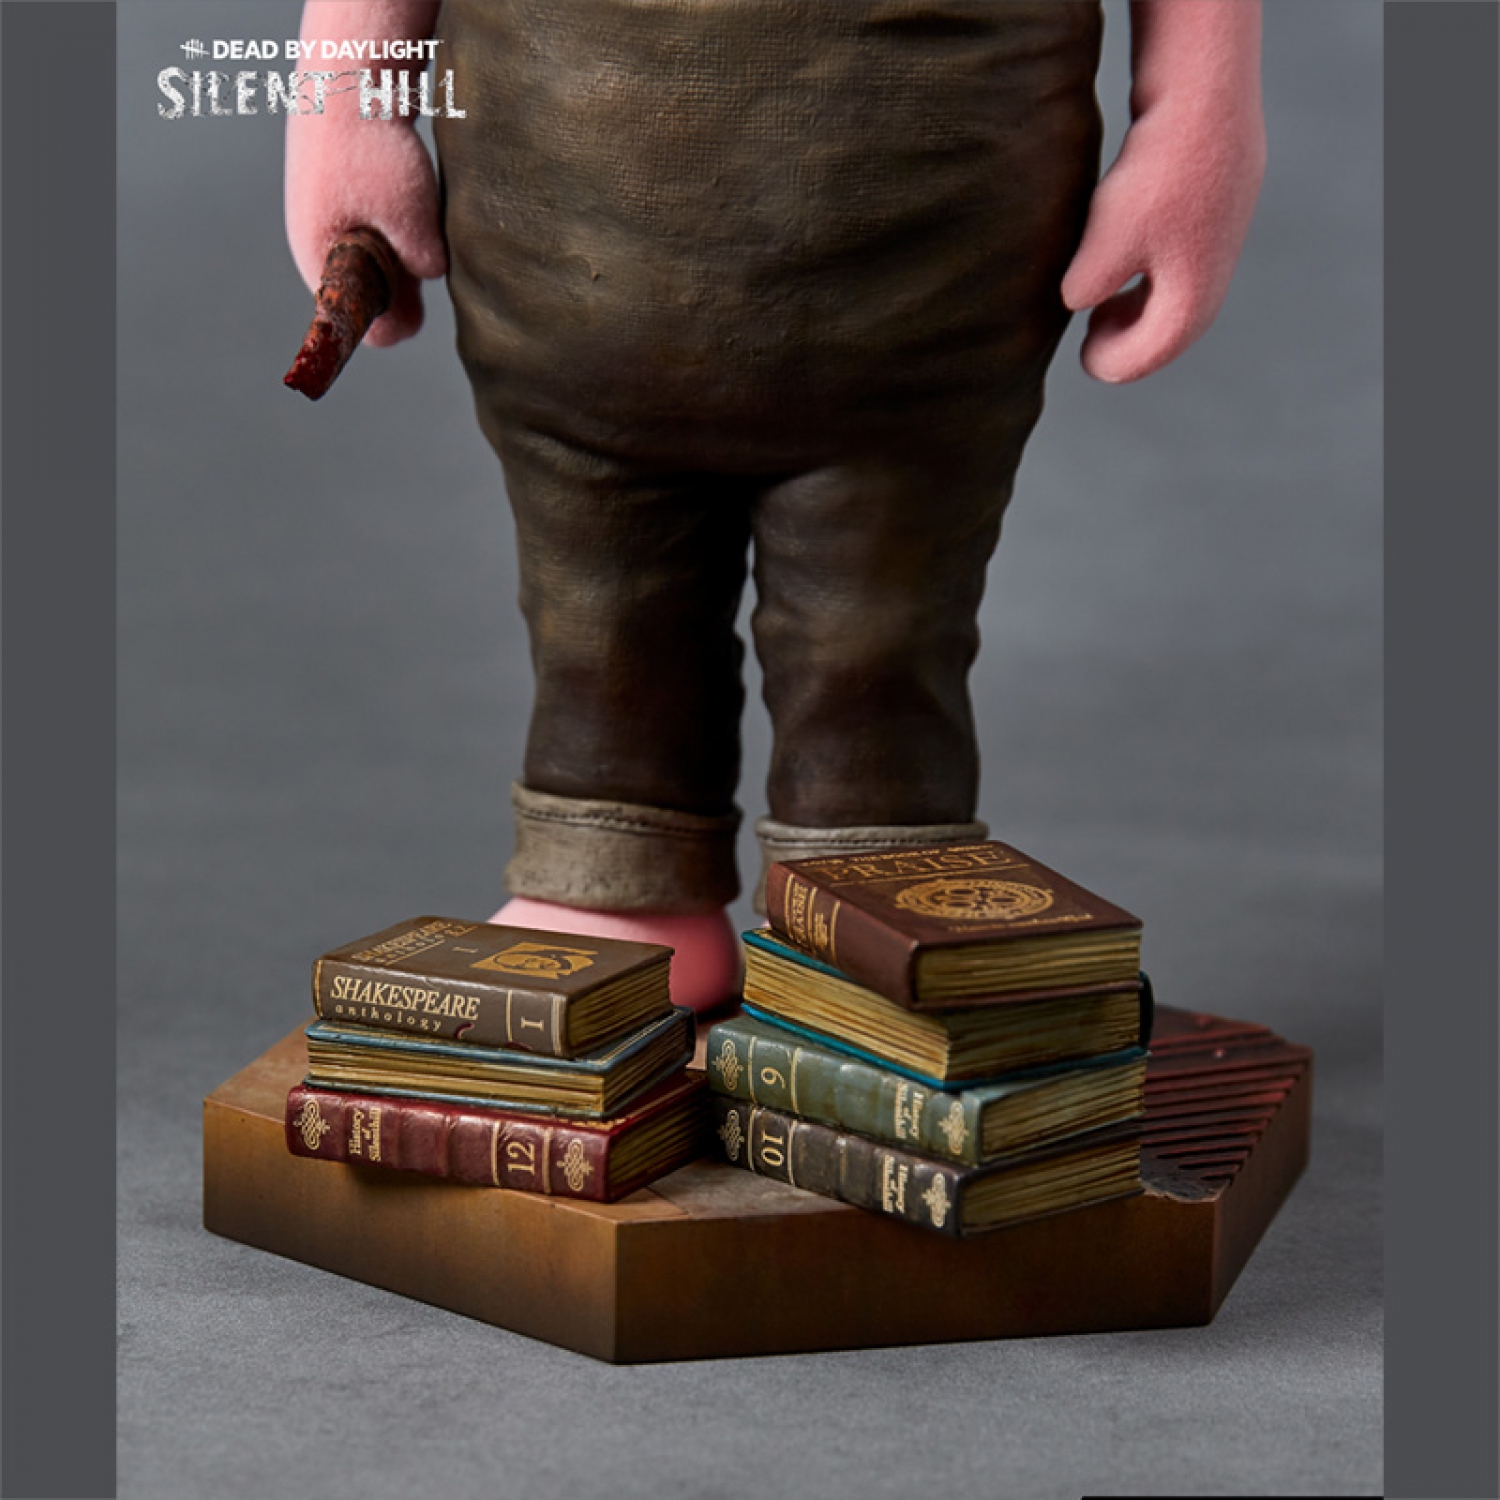 SILENT HILL x Dead by Daylight, Robbie the Rabbit Pink 1/6 Scale Statue